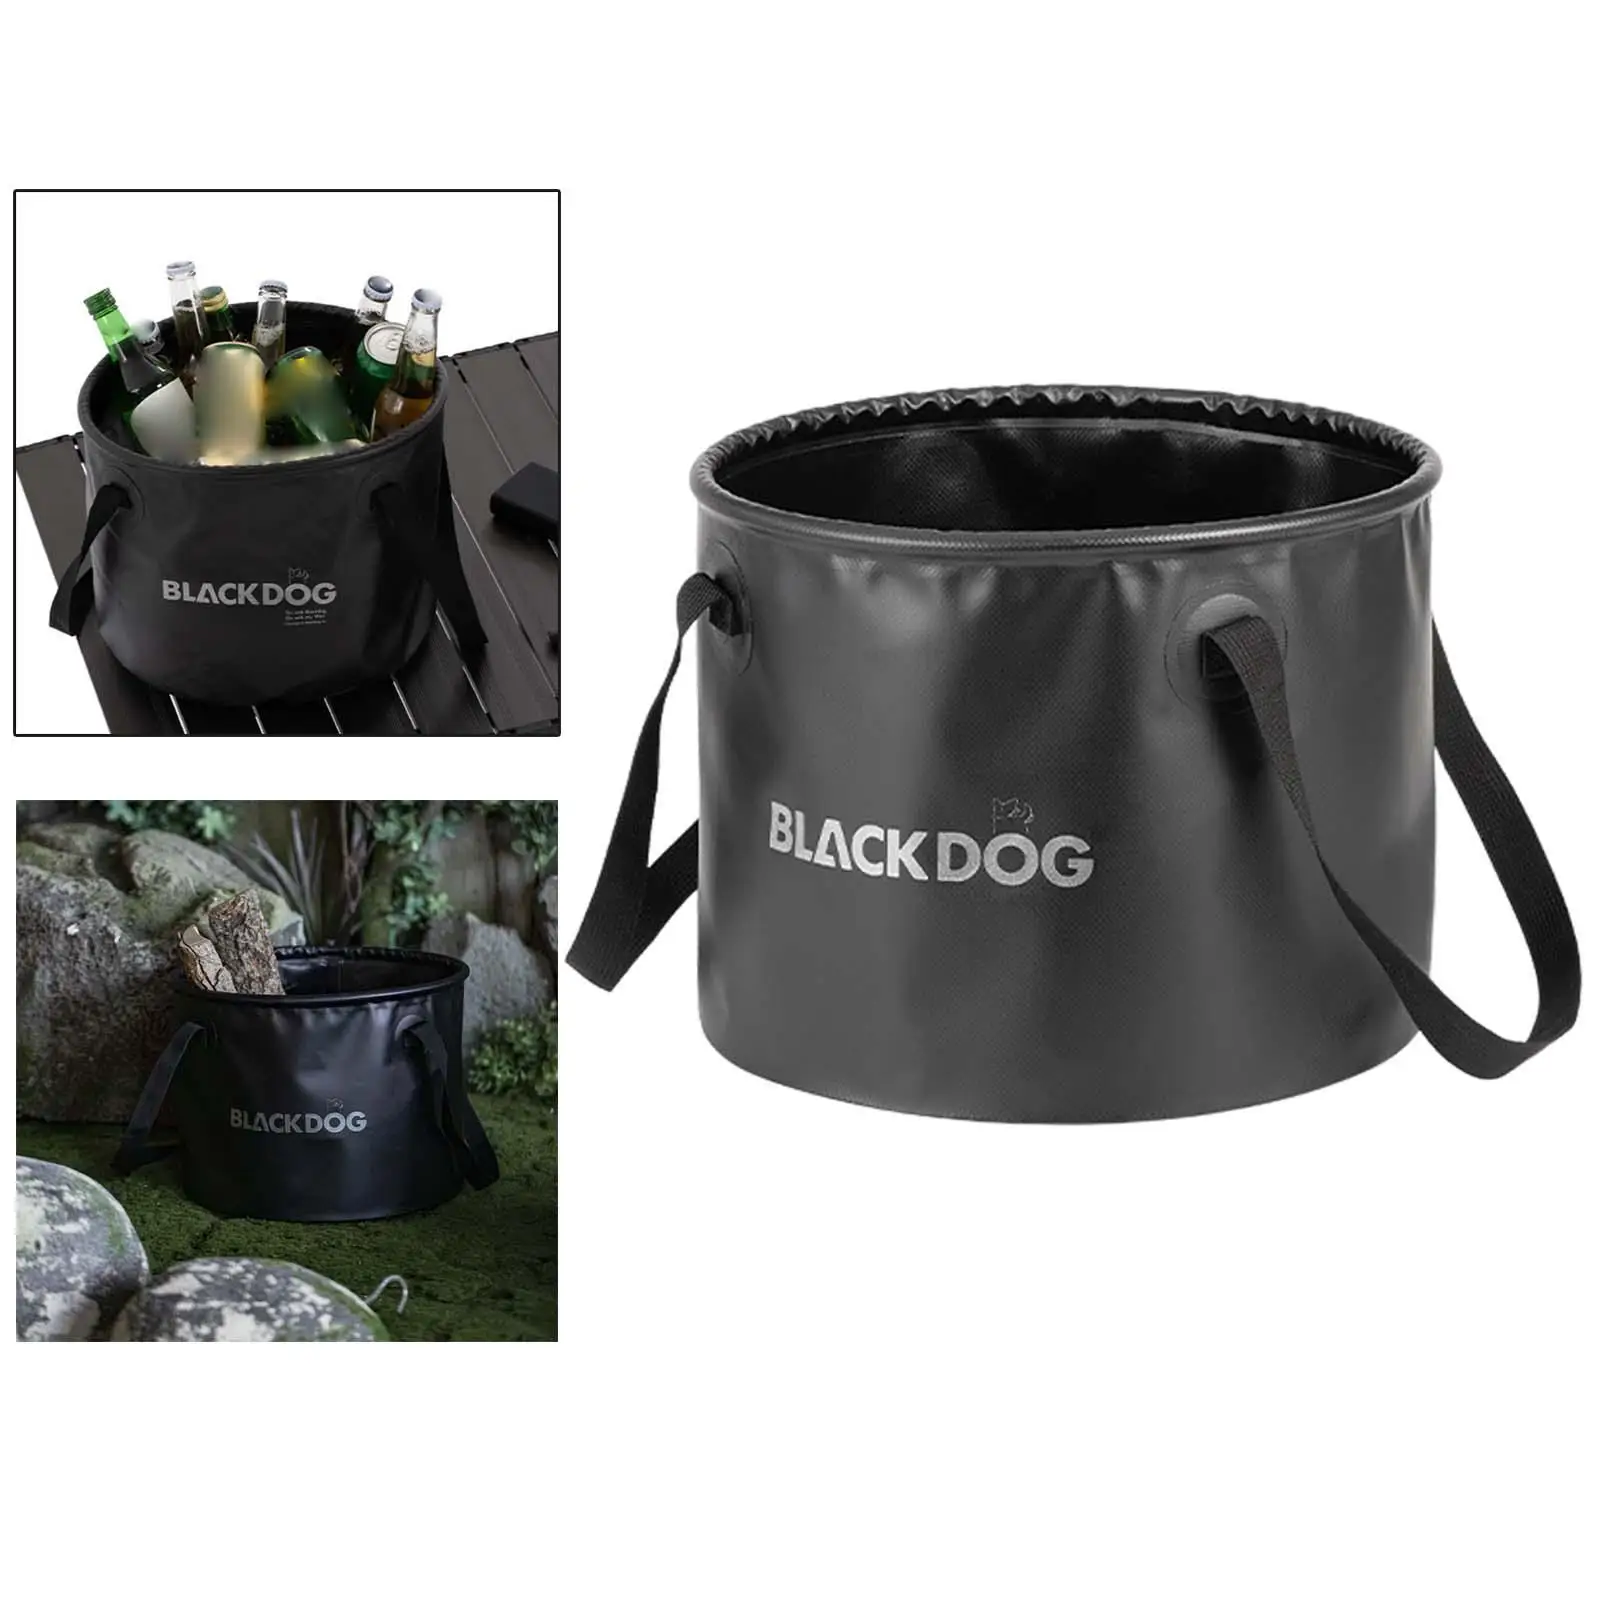 Foldable Round Bucket Portable with Handle 20L Mesh Basket for Gardening